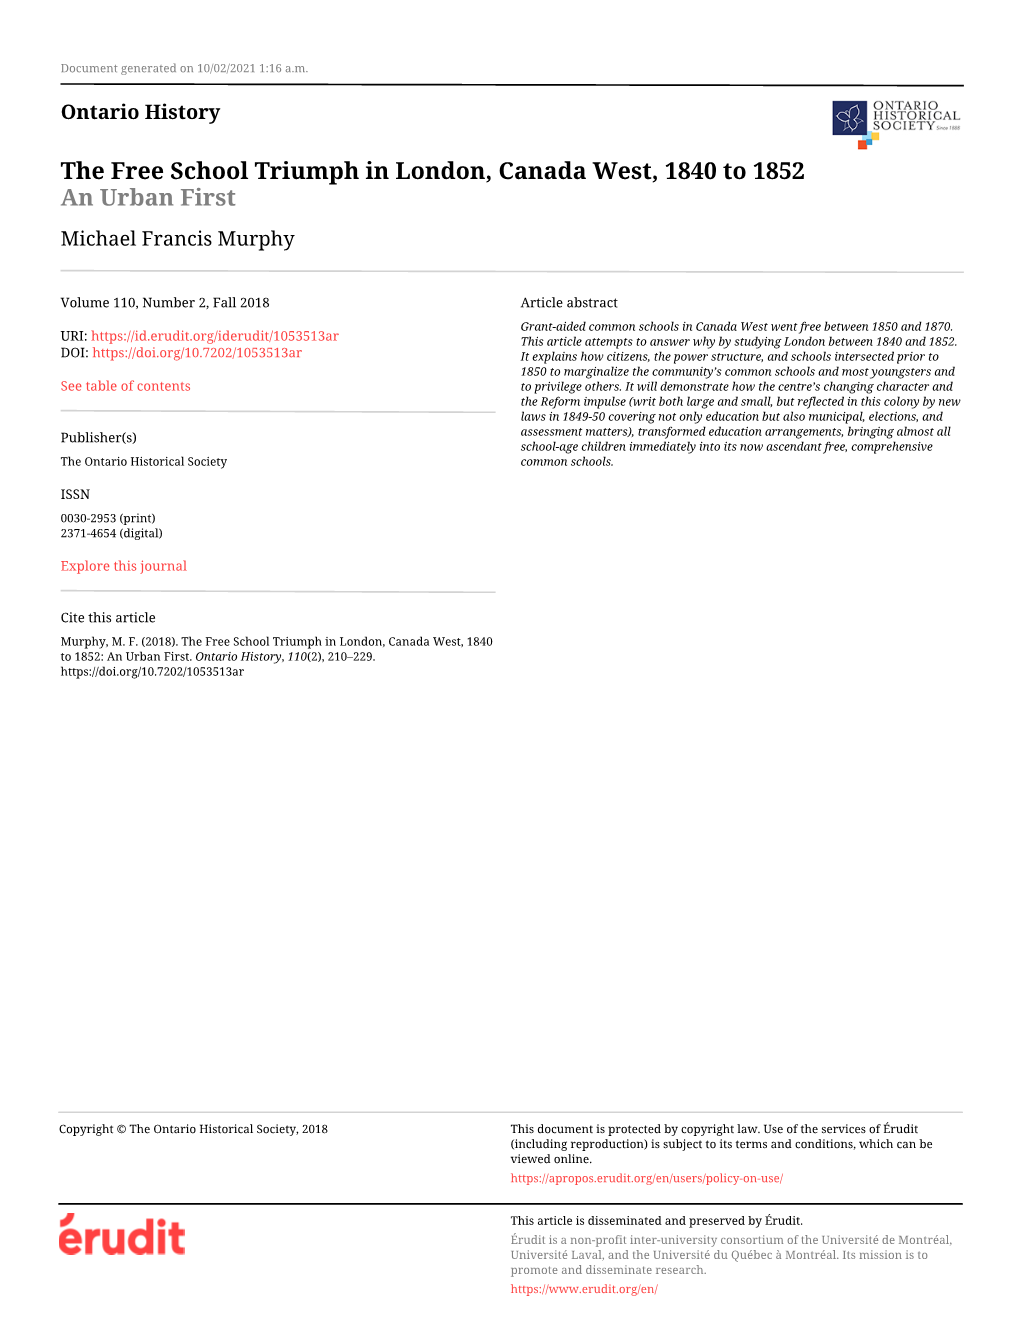 The Free School Triumph in London, Canada West, 1840 to 1852 an Urban First Michael Francis Murphy